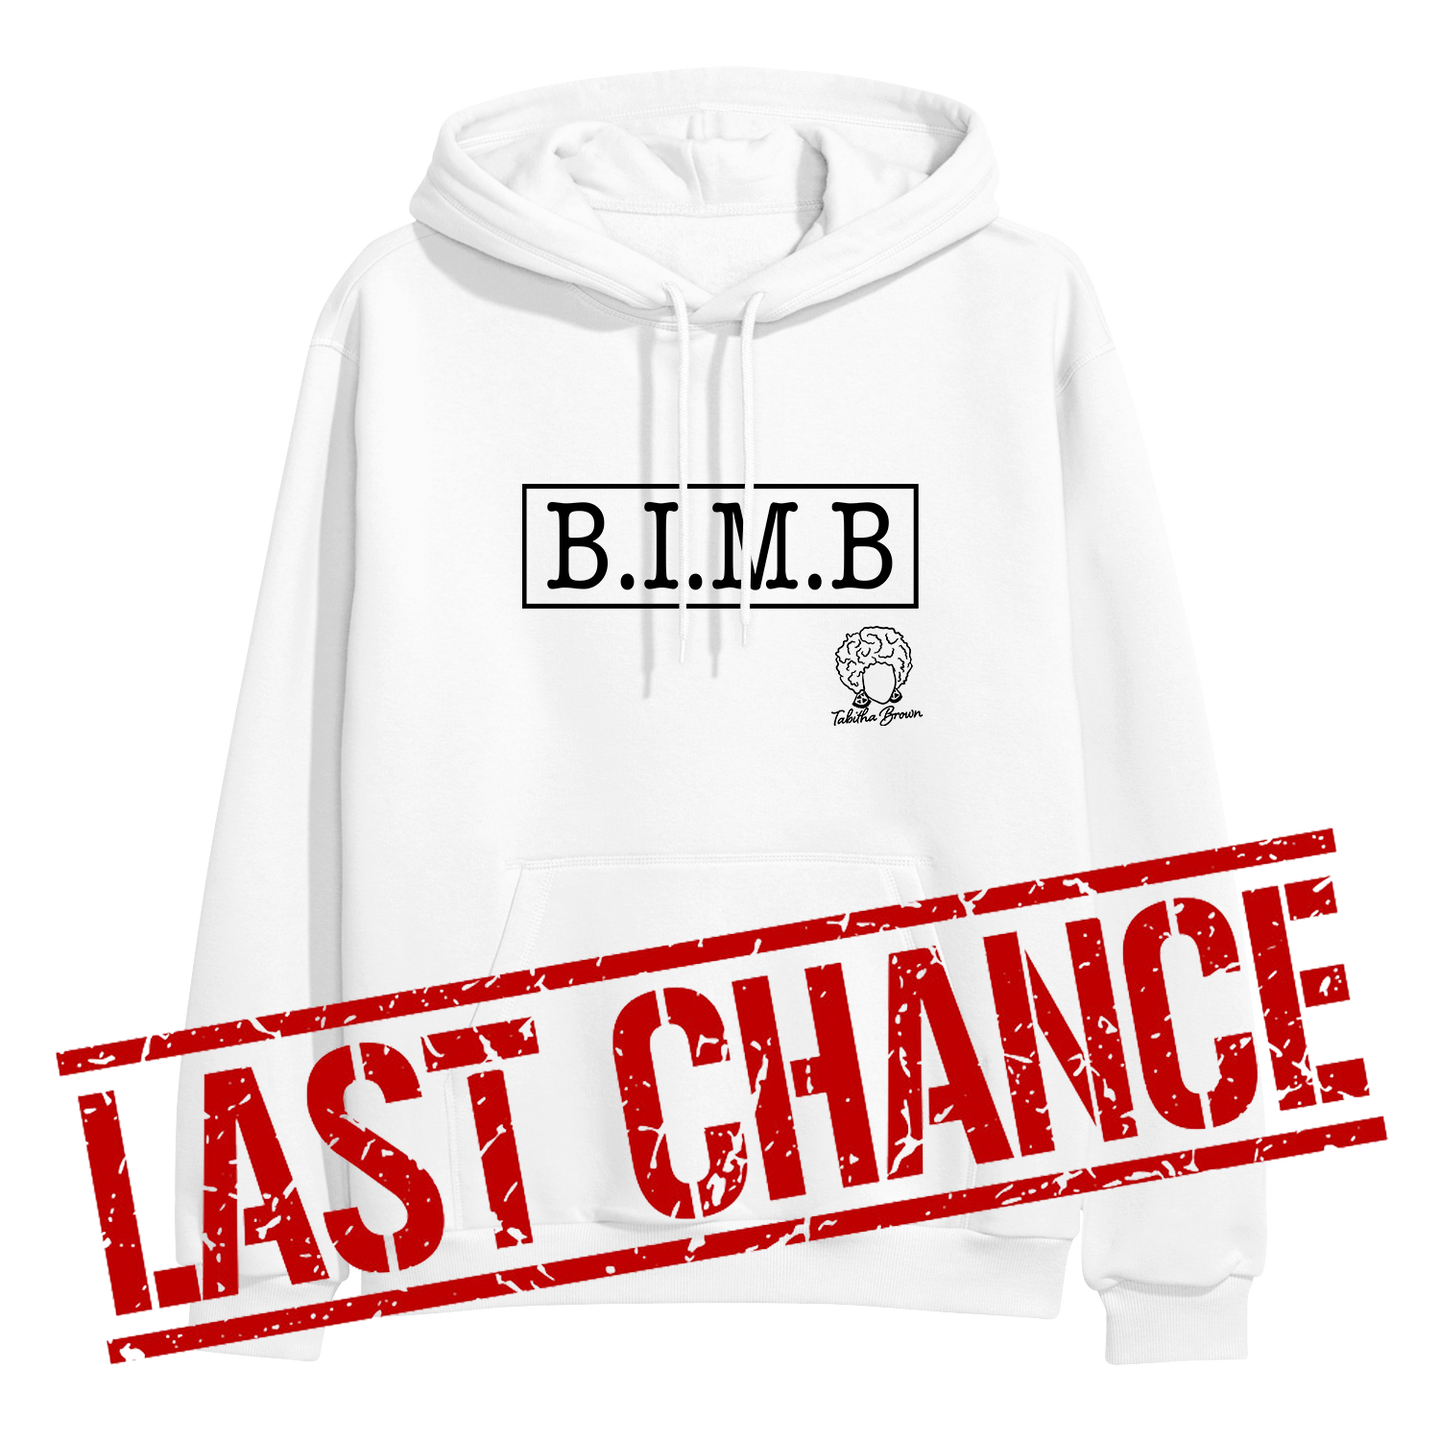 image of white pullover hoodie on clear background. hoodie has full chest print in black that has a rectangle, and inside that in capital letters says B I M B and outside the rectangle on the bottom right is tabitha brown's logo of her head wearing earrings and her name in cursive. over the bottom part of the image in large red text says last chance.